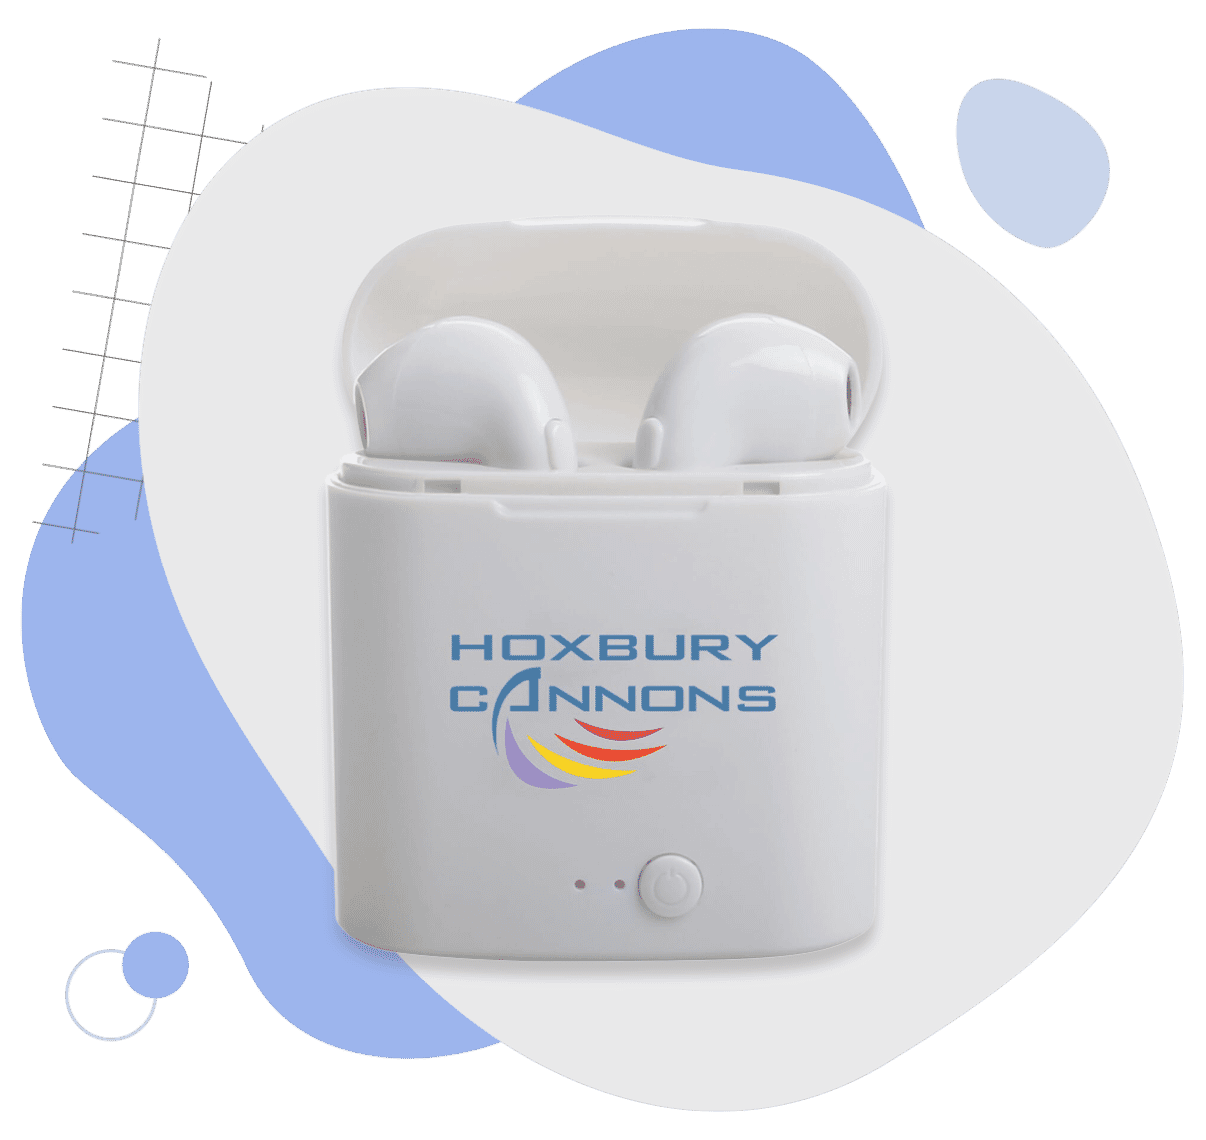 7. Wireless Earbud Pods with Rechargeable Case